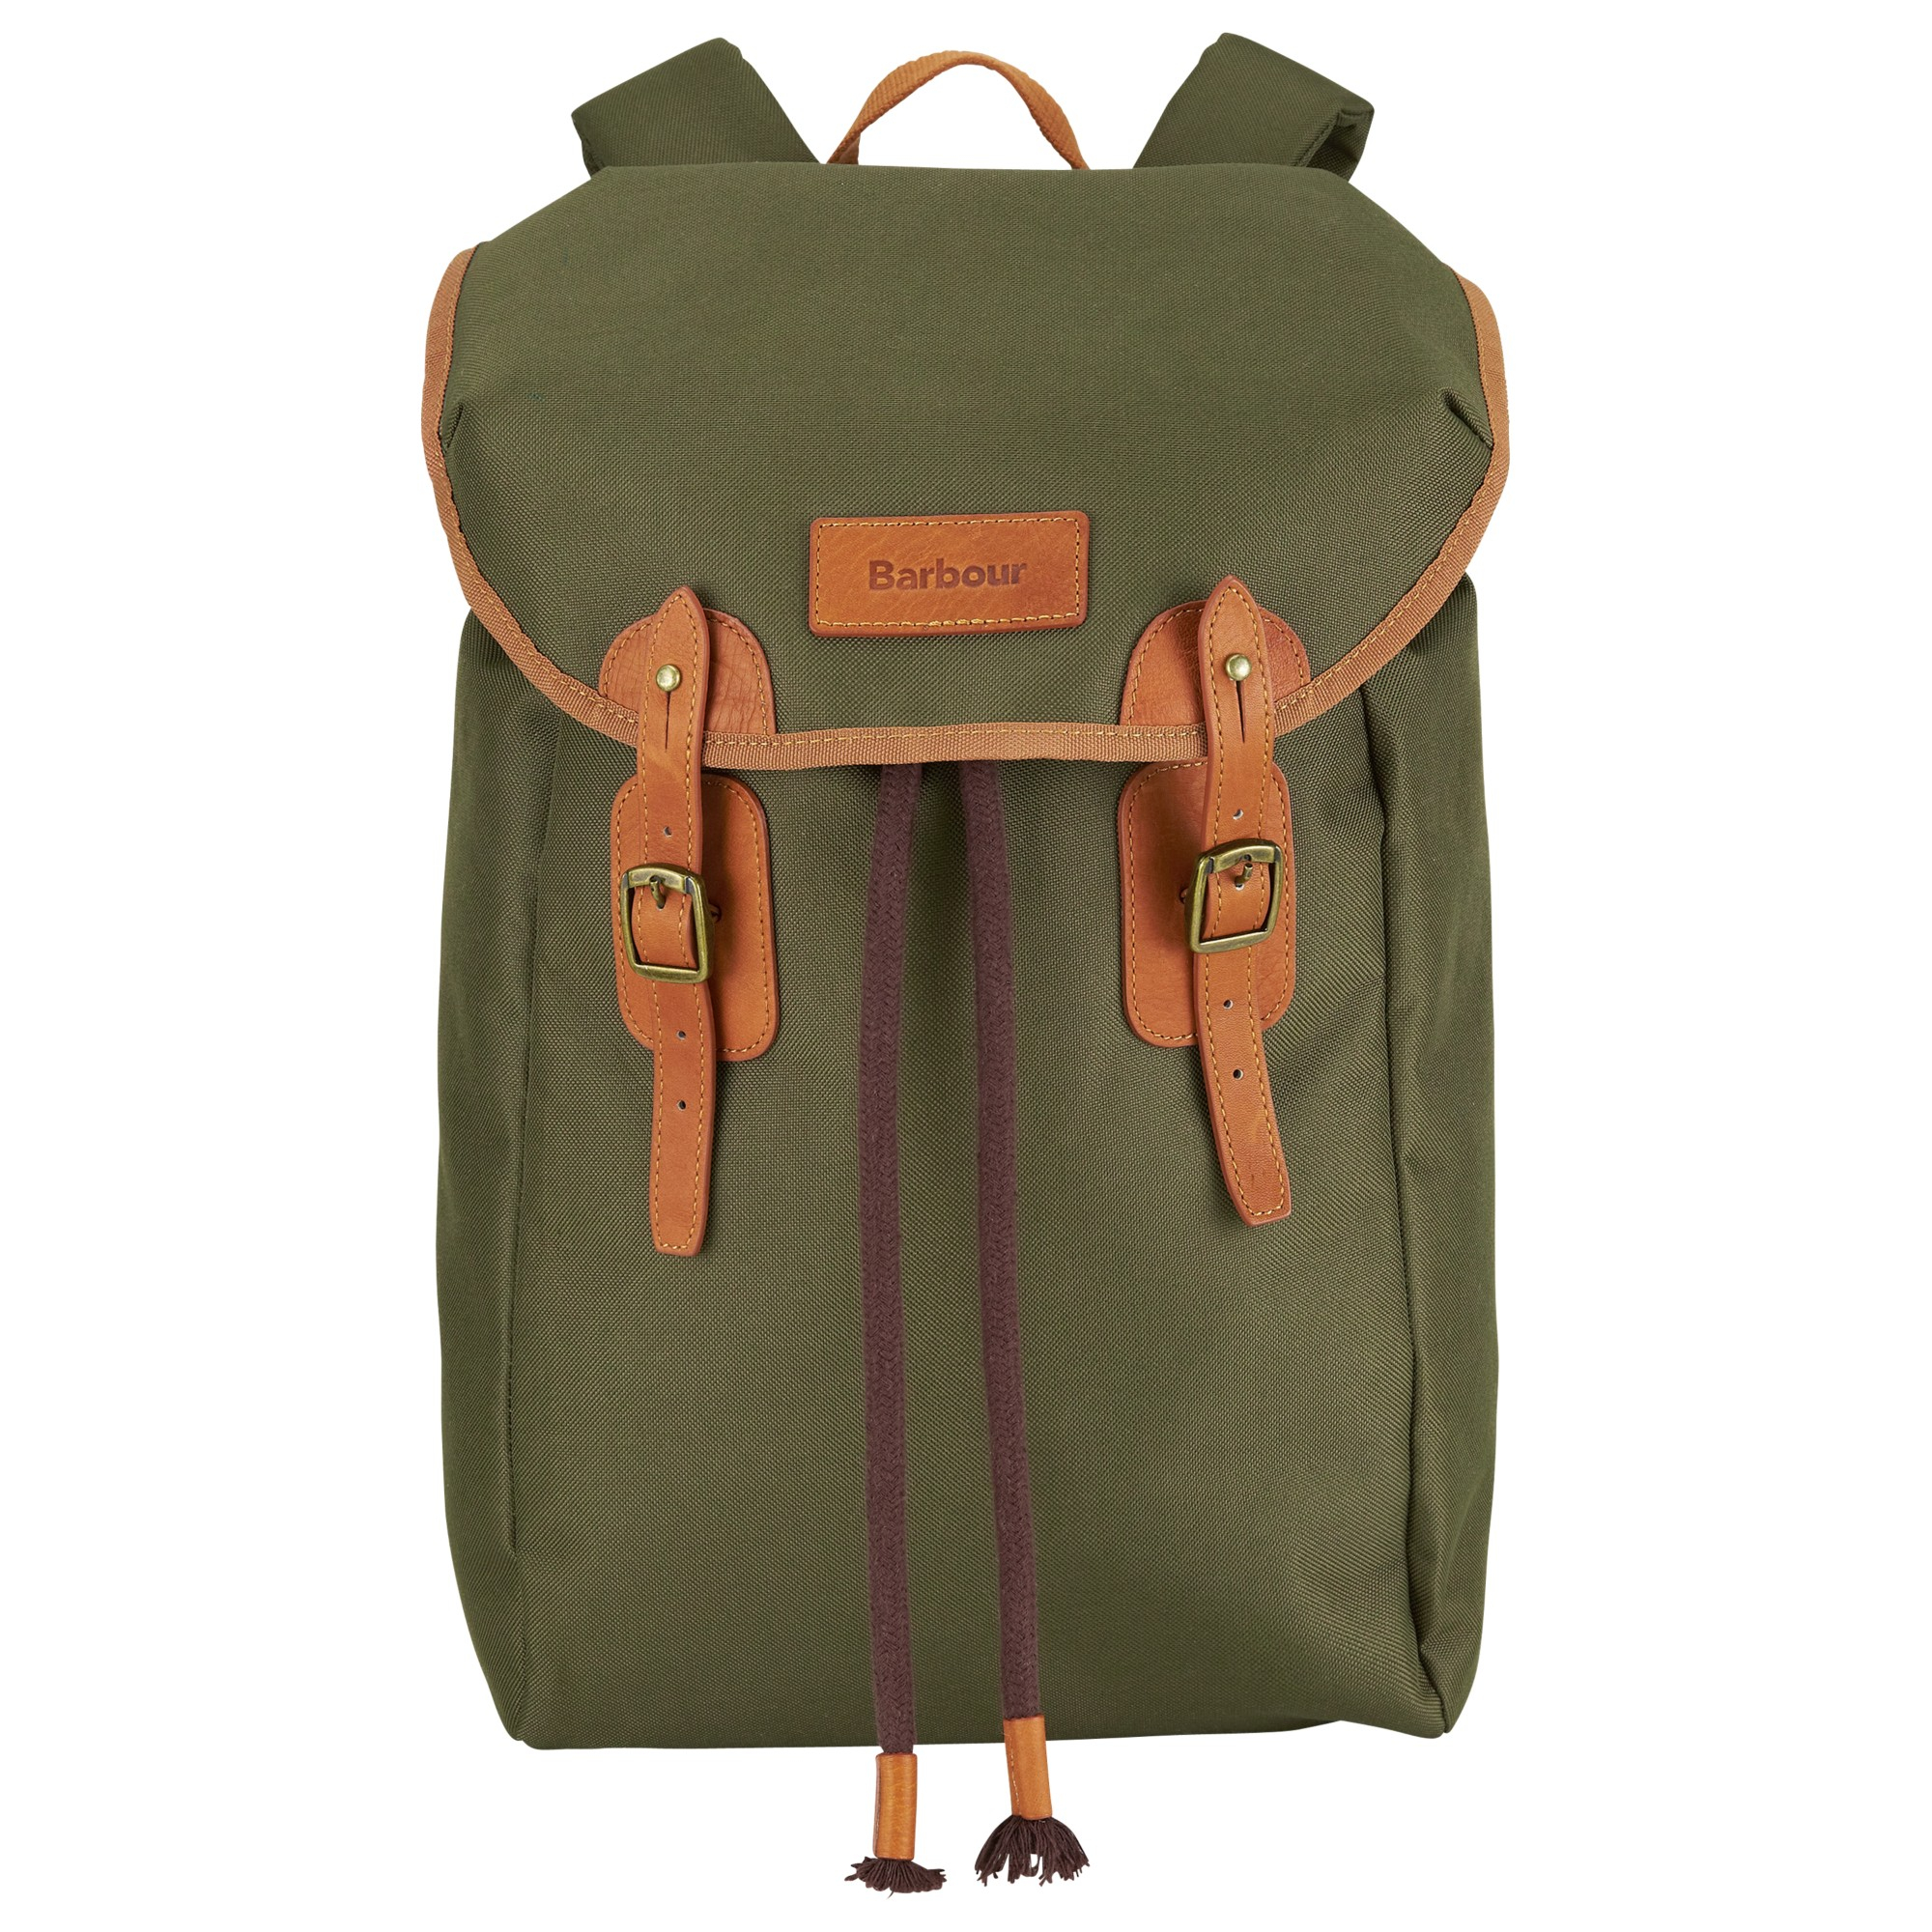 Barbour Lachie Waxed Cotton Backpack in Olive (Green) for Men - Lyst